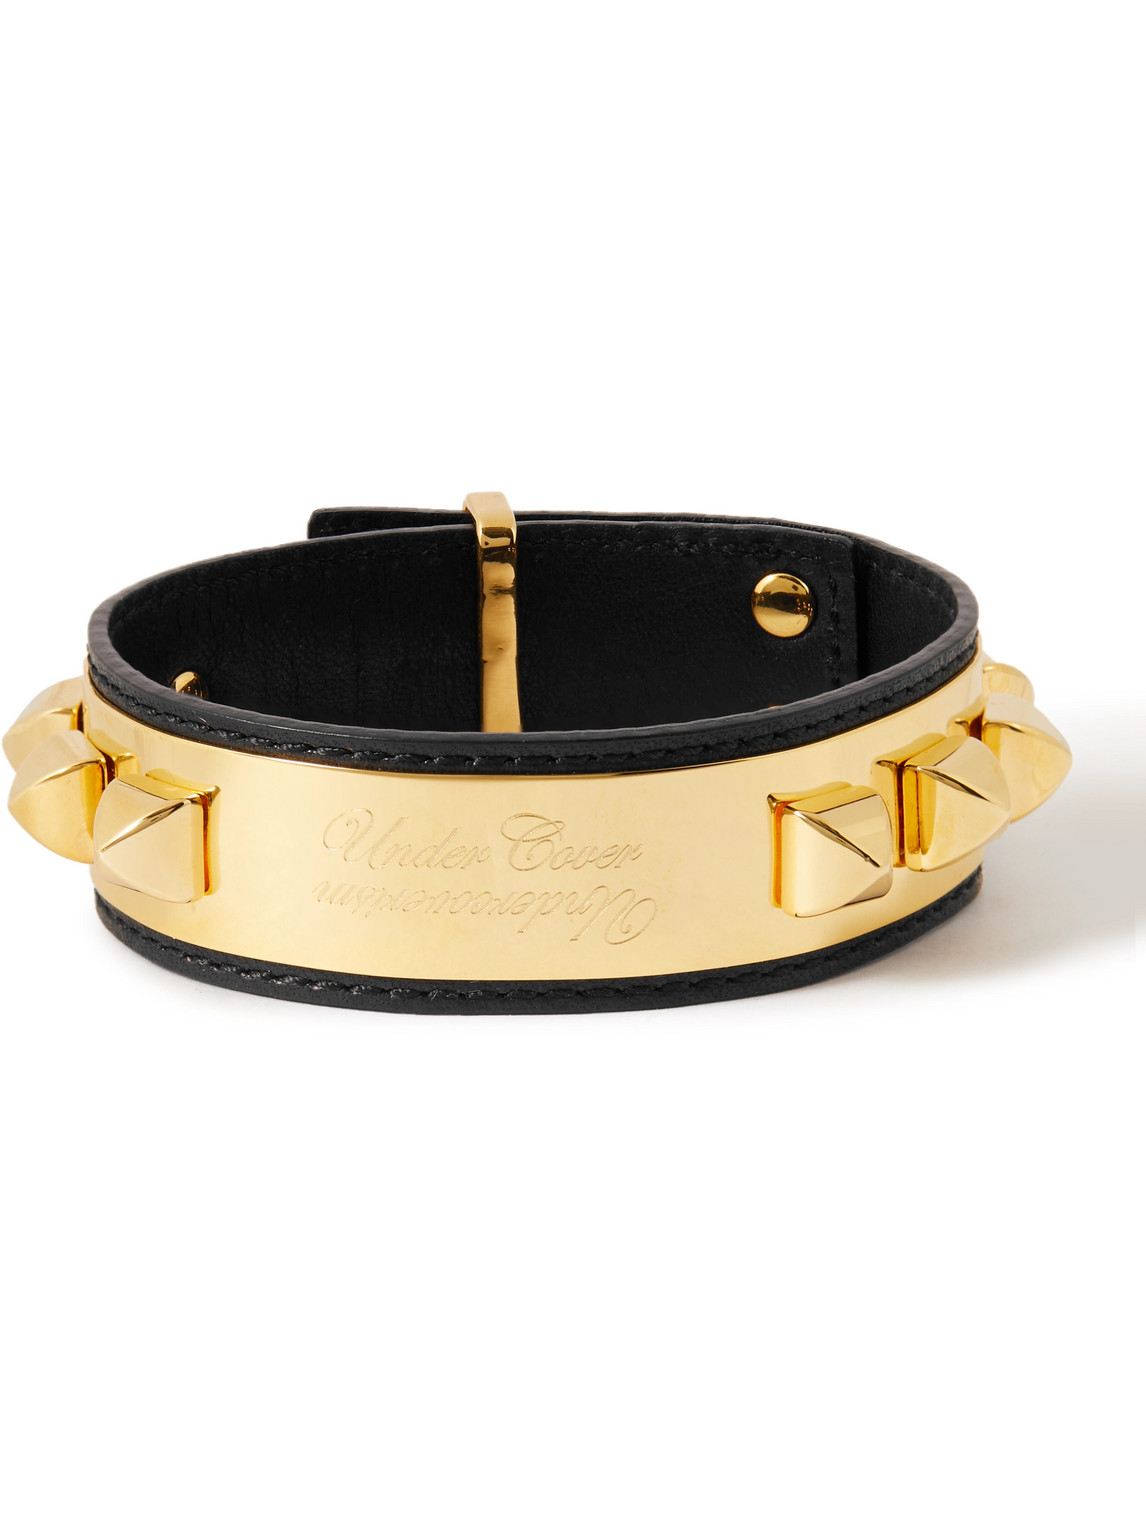 UNDERCOVER ENGRAVED SPIKED GOLD-TONE AND FULL-GRAIN LEATHER CUFF